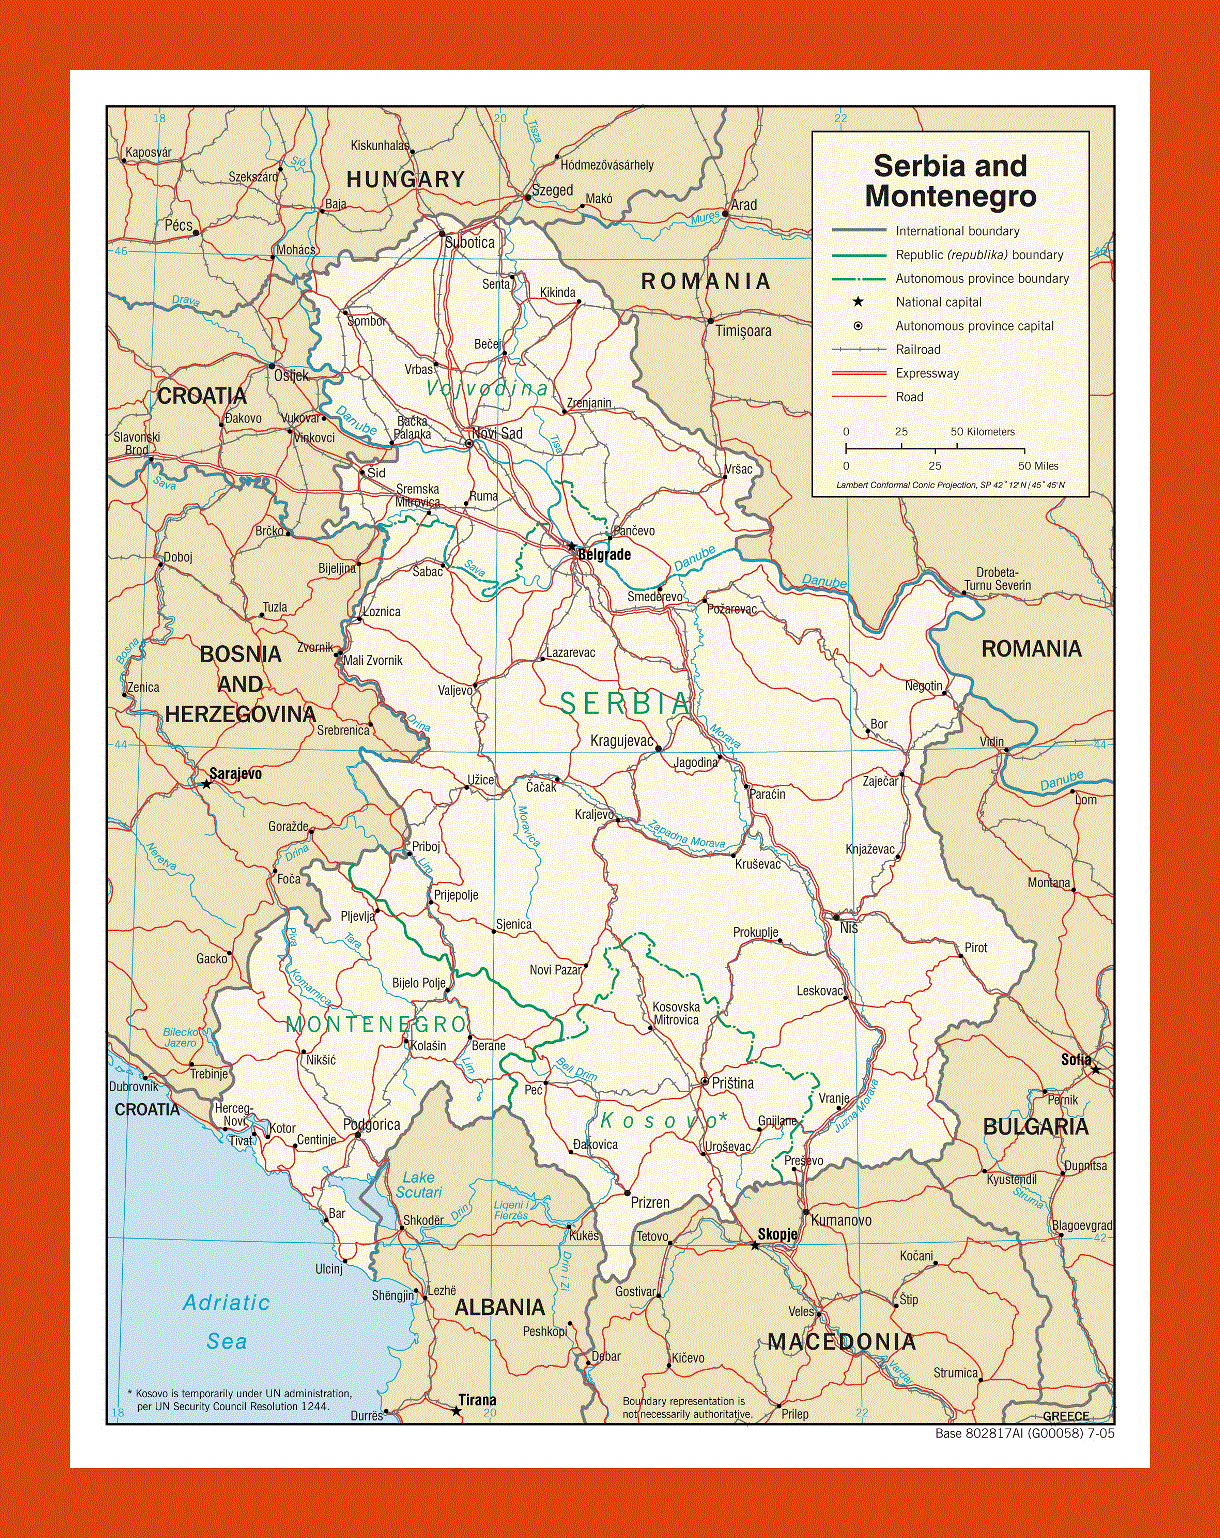 Political map of Serbia and Montenegro - 2005